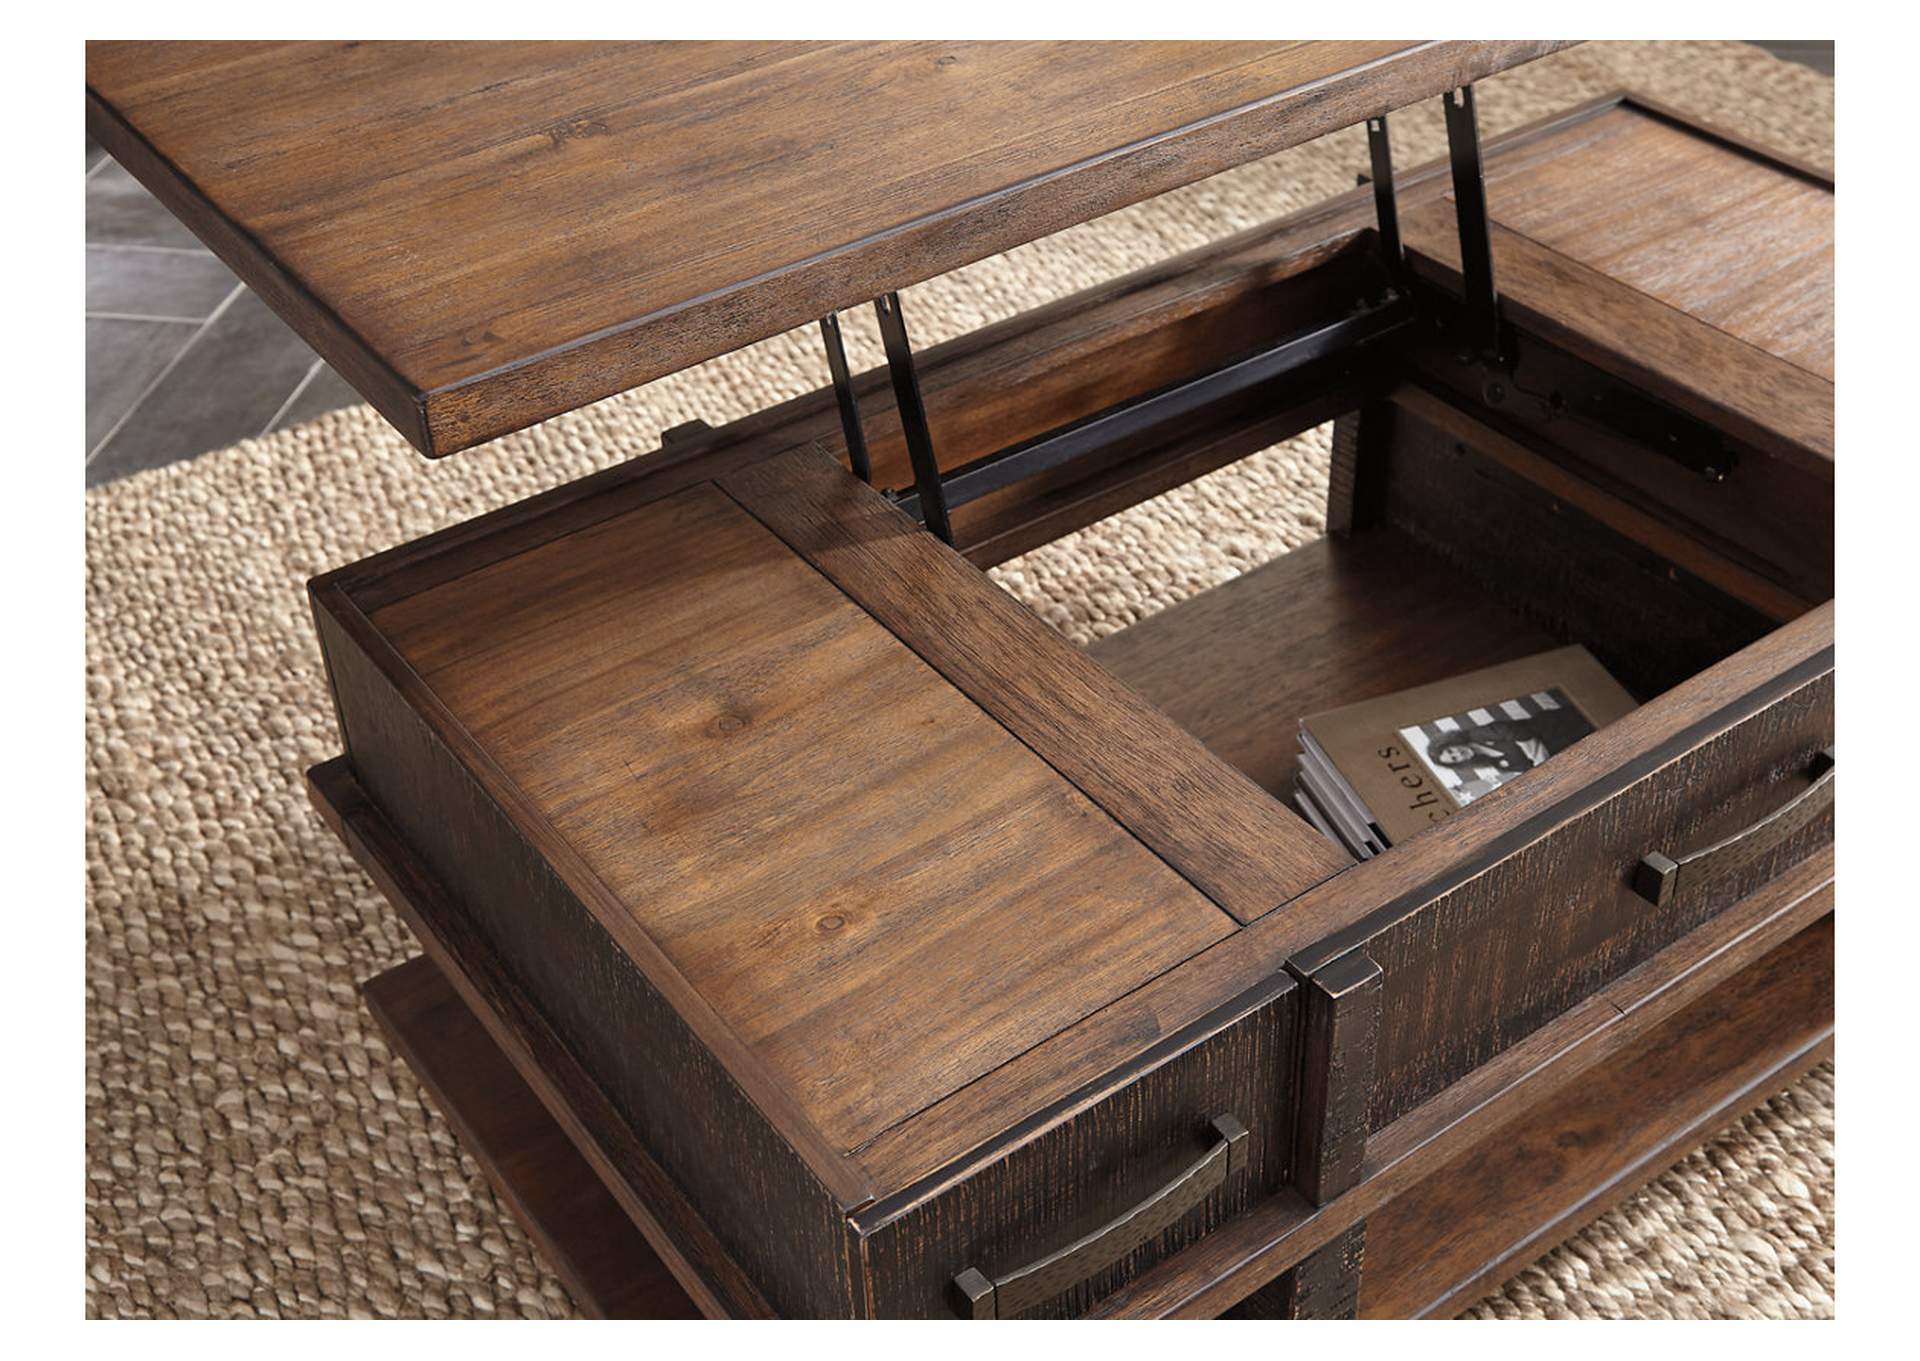 Stanah Coffee Table with Lift Top,Signature Design By Ashley